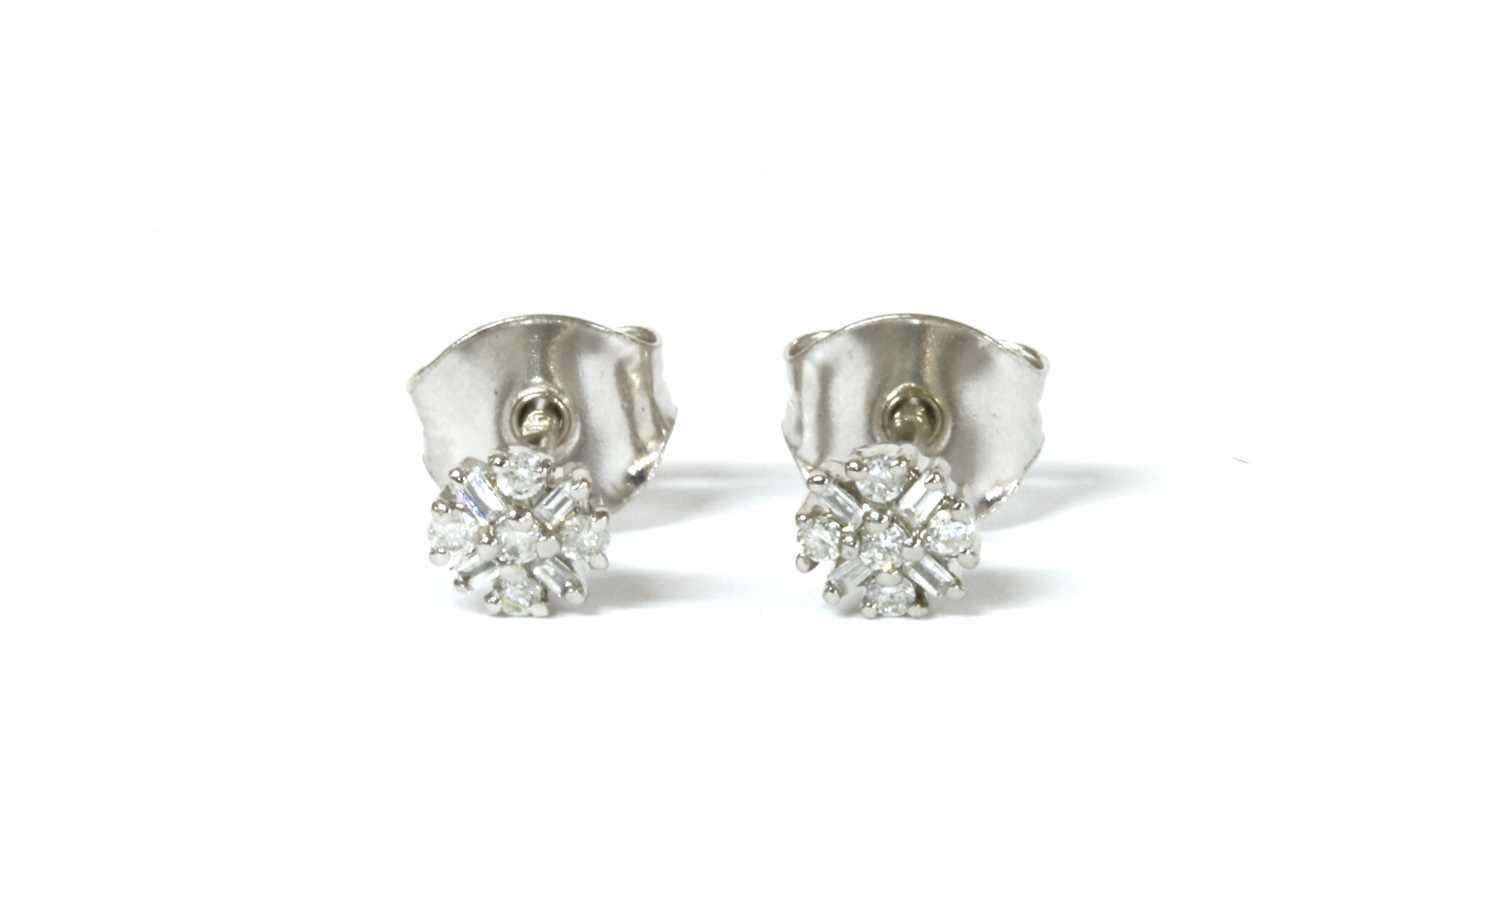 Lot 1133 - A pair of white gold diamond cluster stud earrings